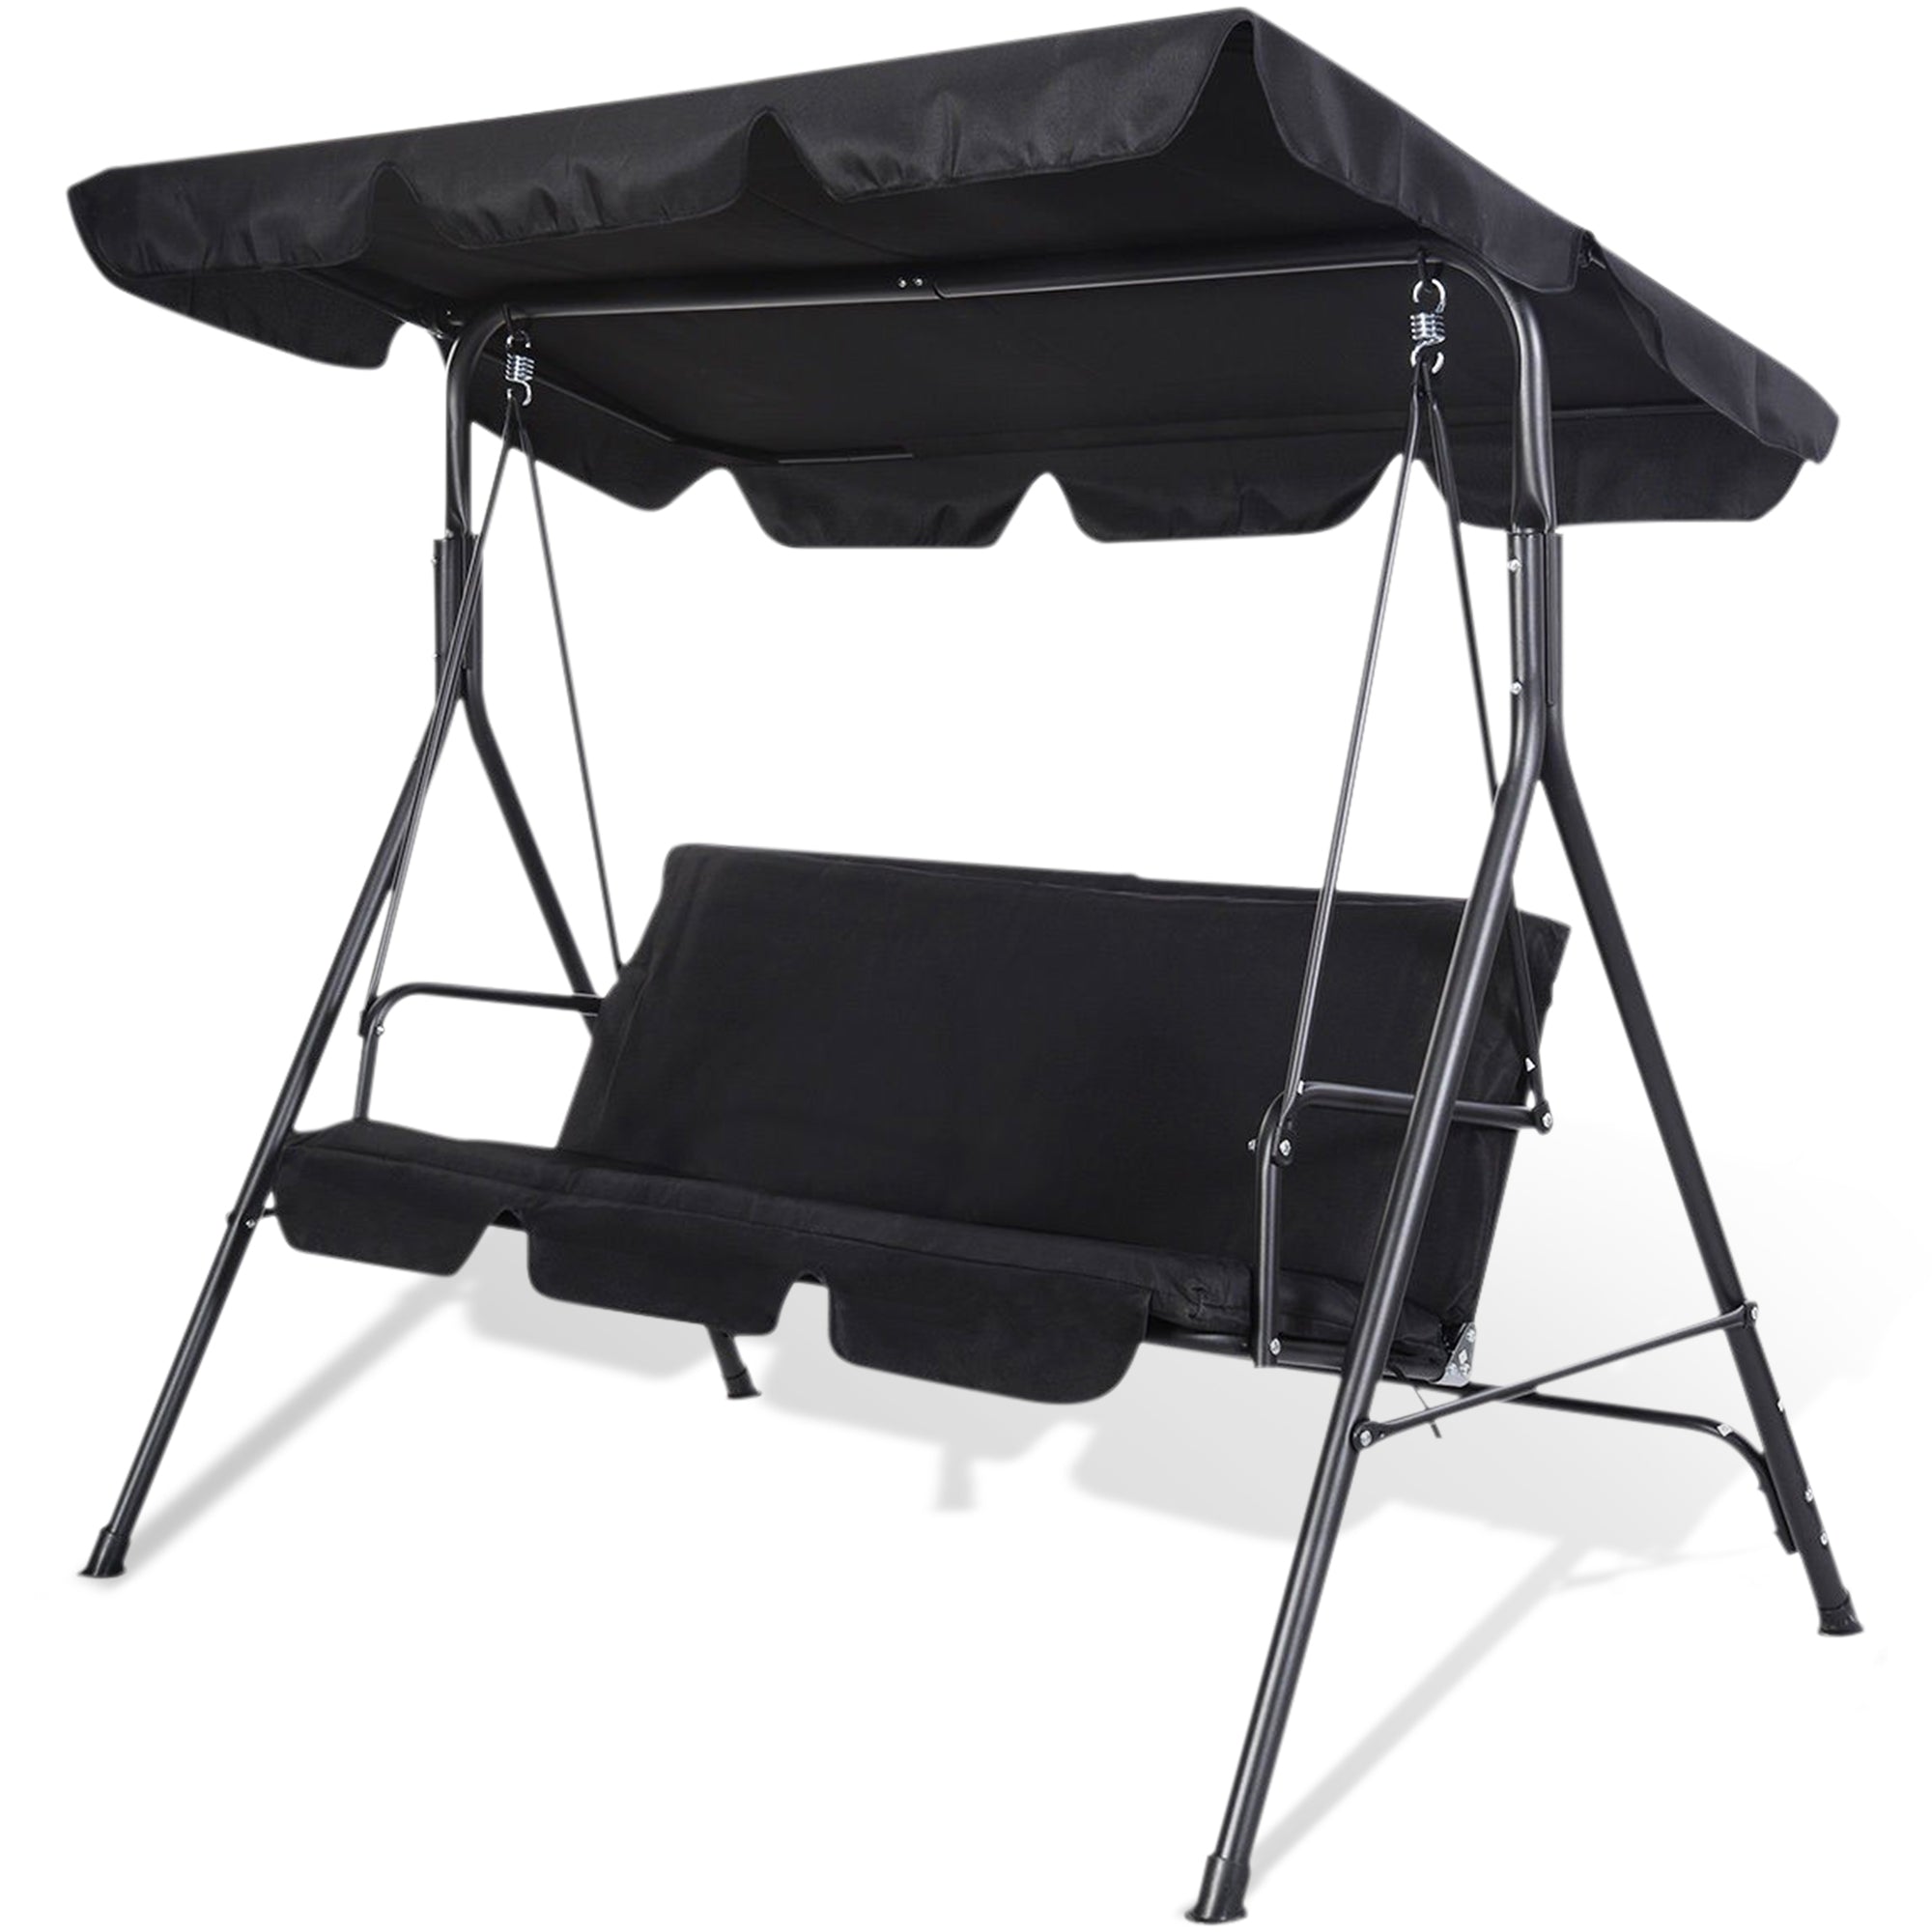 SUNMER 3-Seater Swing With Canopy - Black